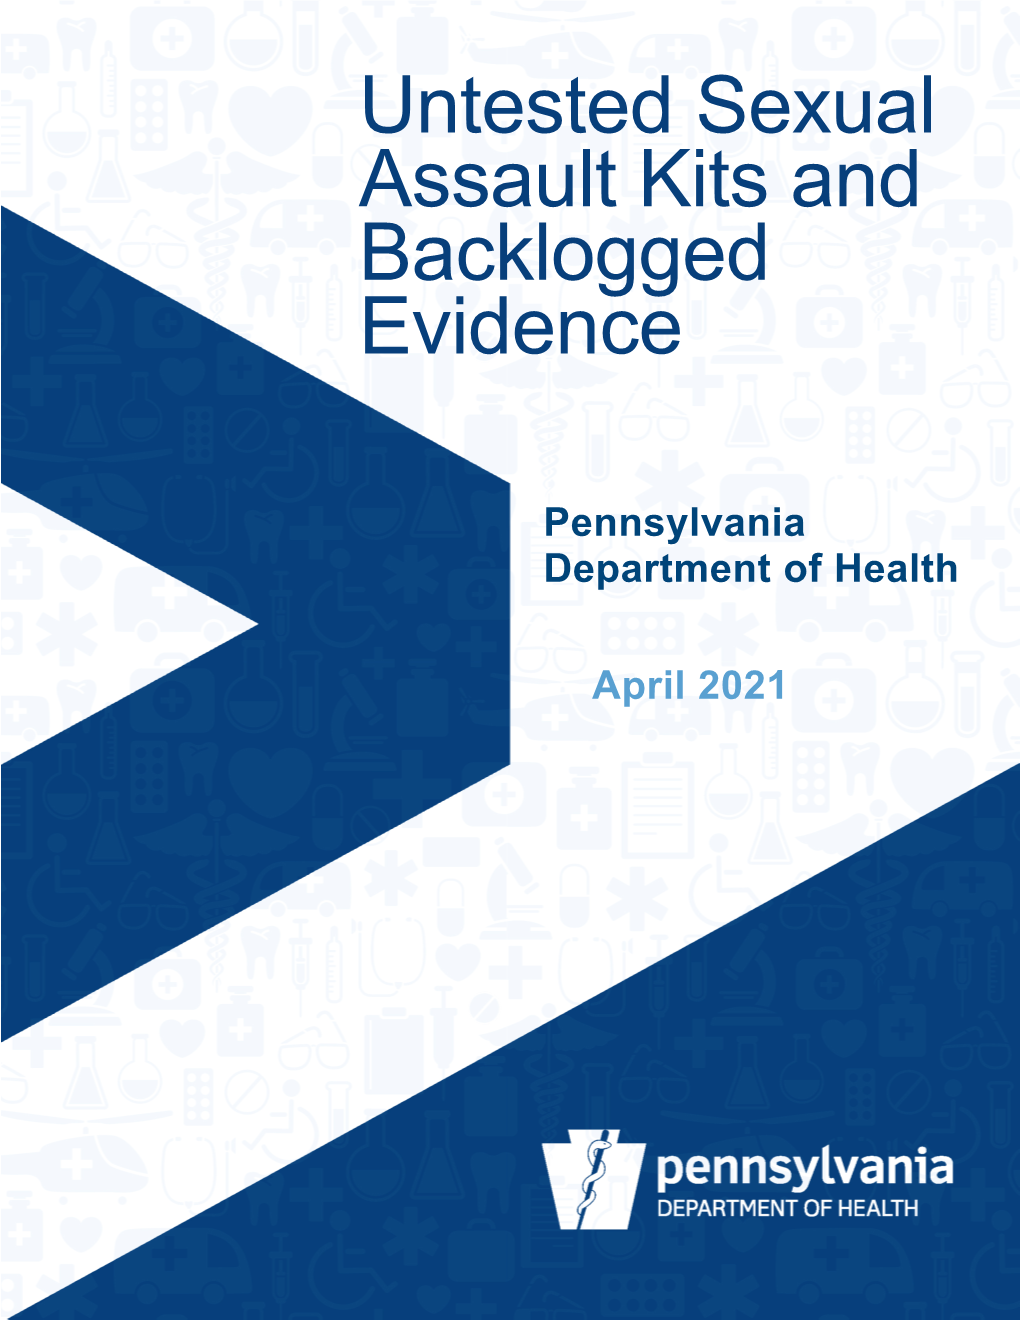 2021 Untested Sexual Assault Kits and Backlogged Evidence Report